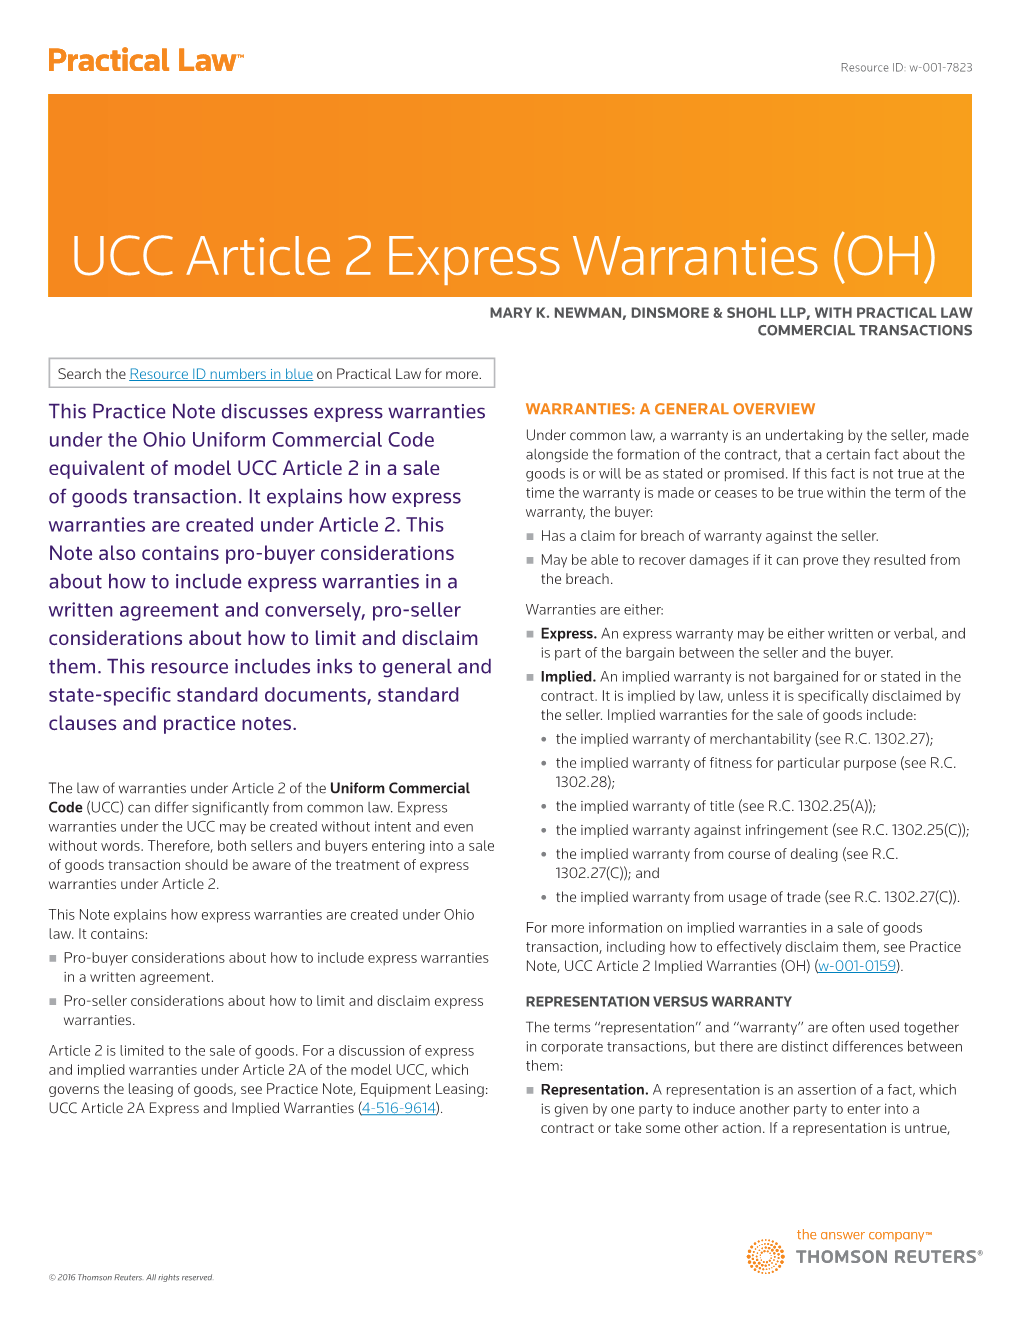 UCC Article 2 Express Warranties (OH)